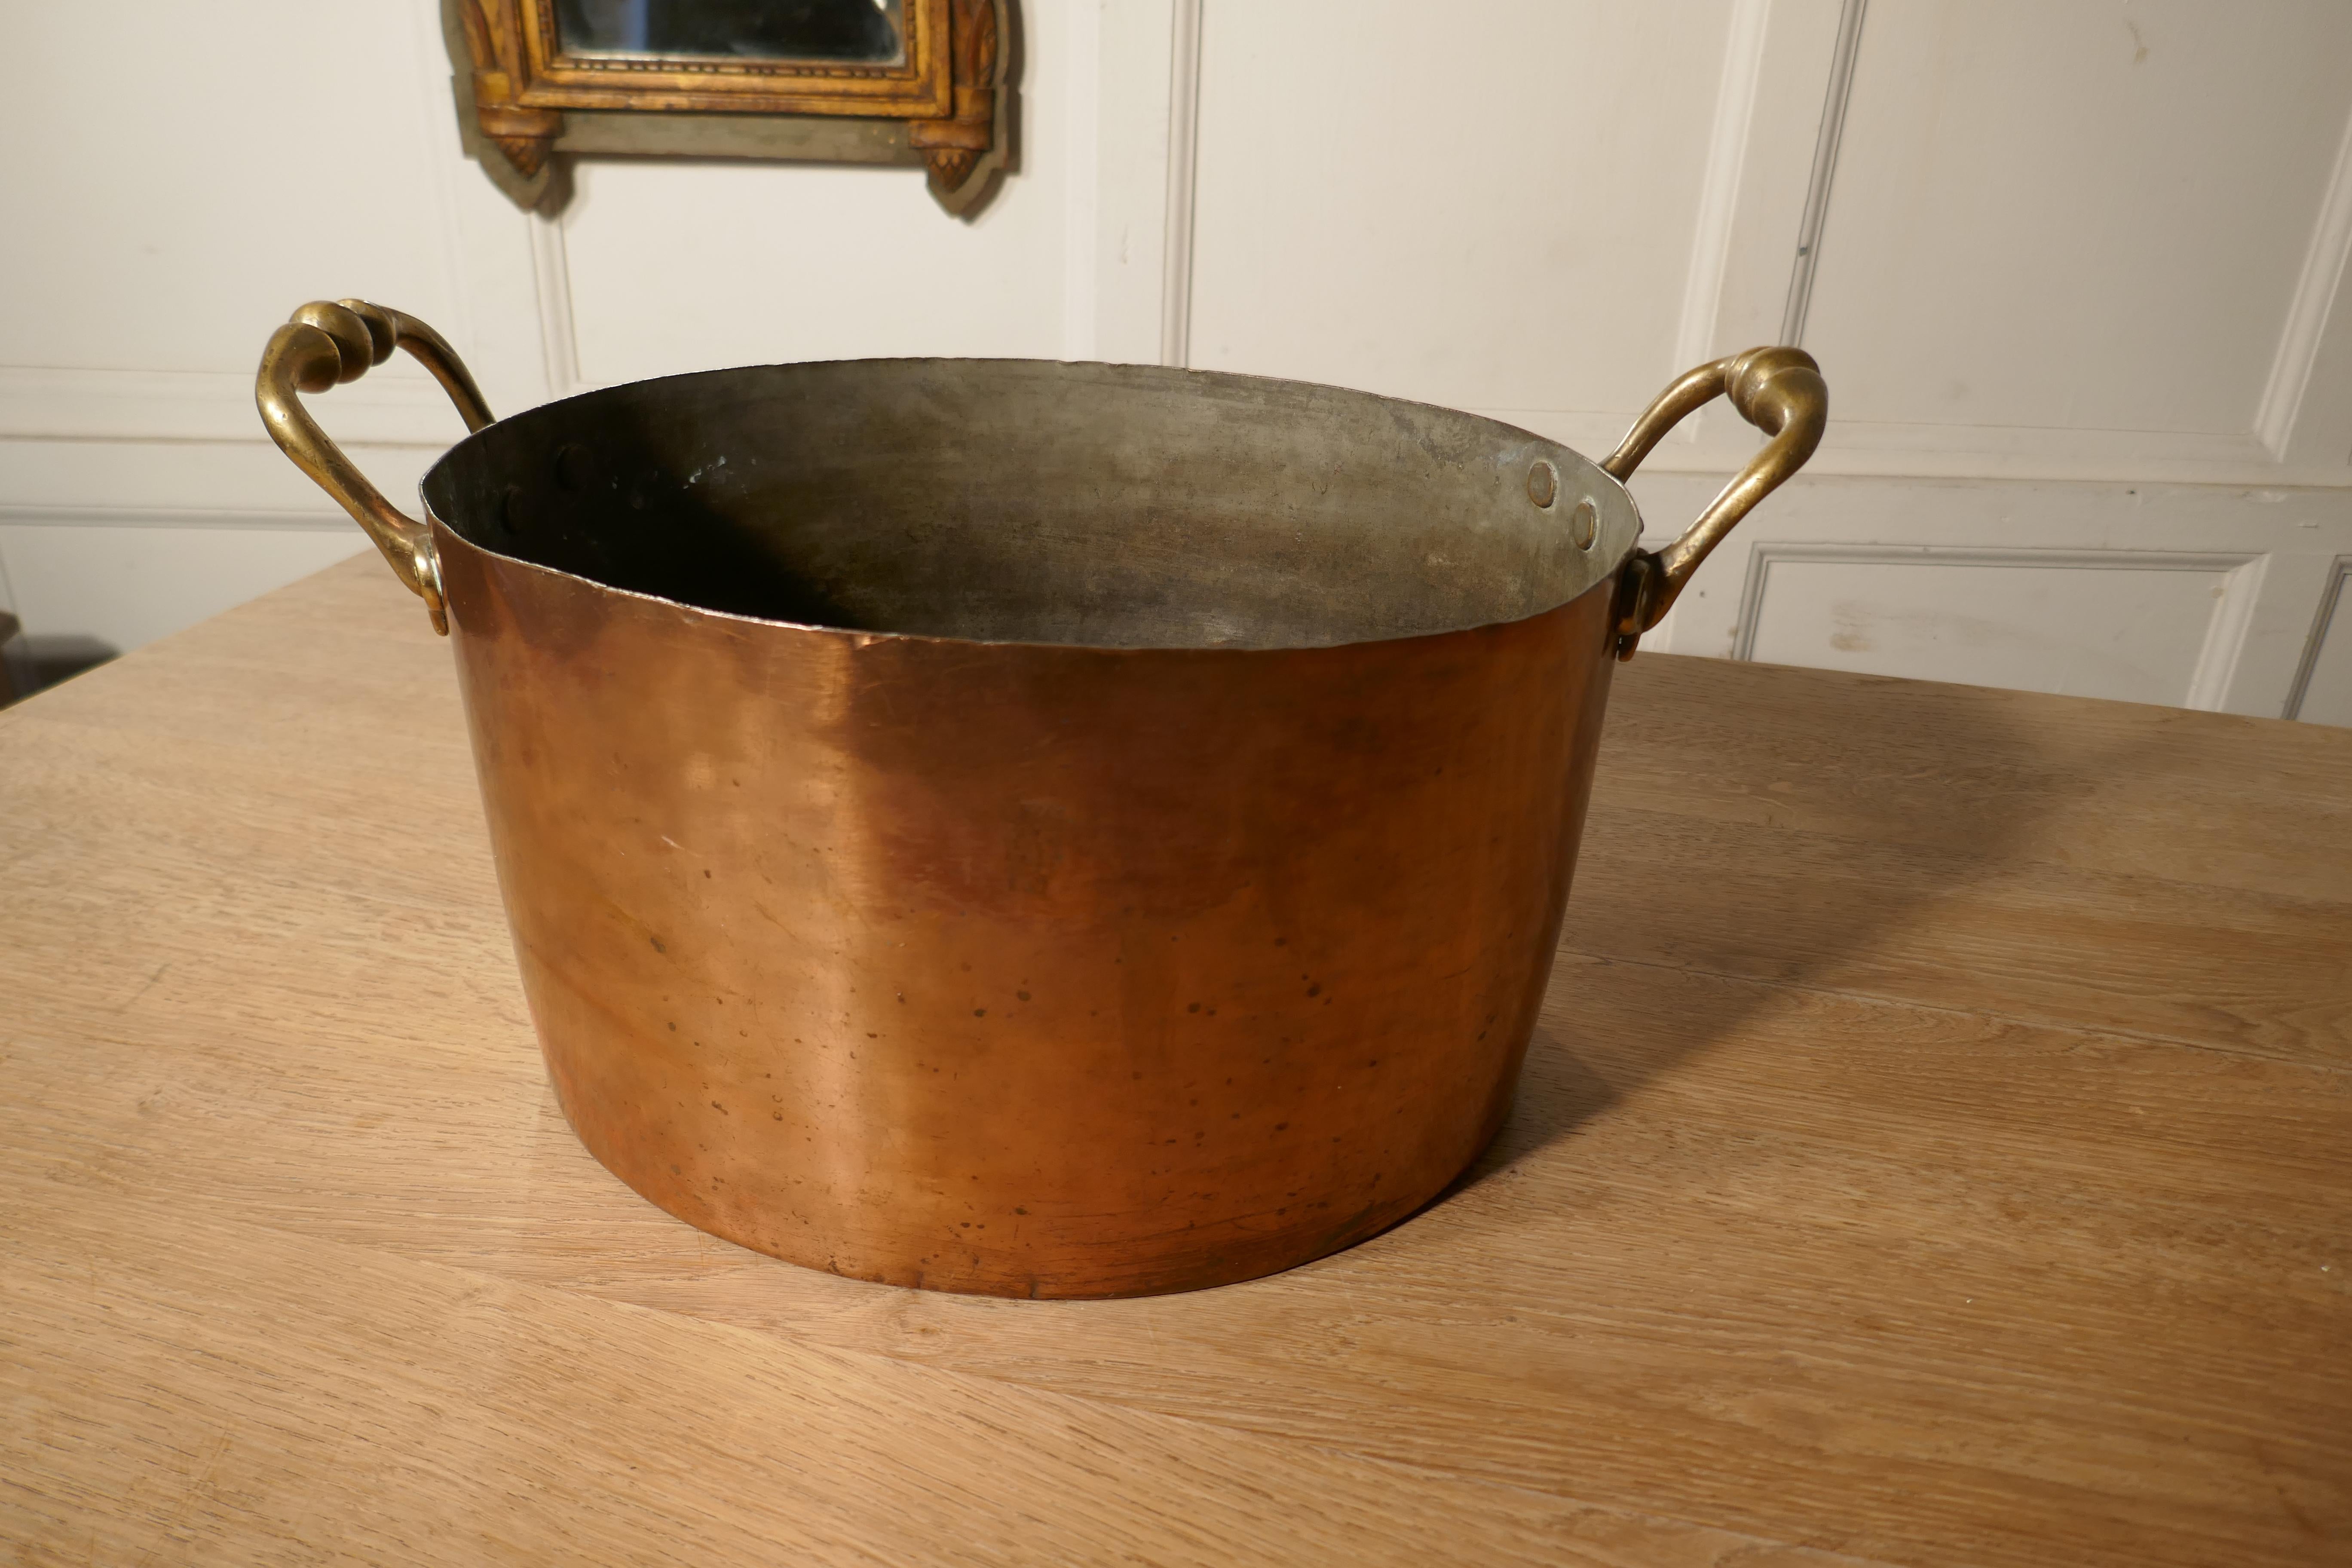 Large 19th century double handled copper pot

This is a lovely looking pot, the pan was obviously a very treasured piece, it has original Brass handles with robust copper riveting.
 
A pan of this type would have many uses around the